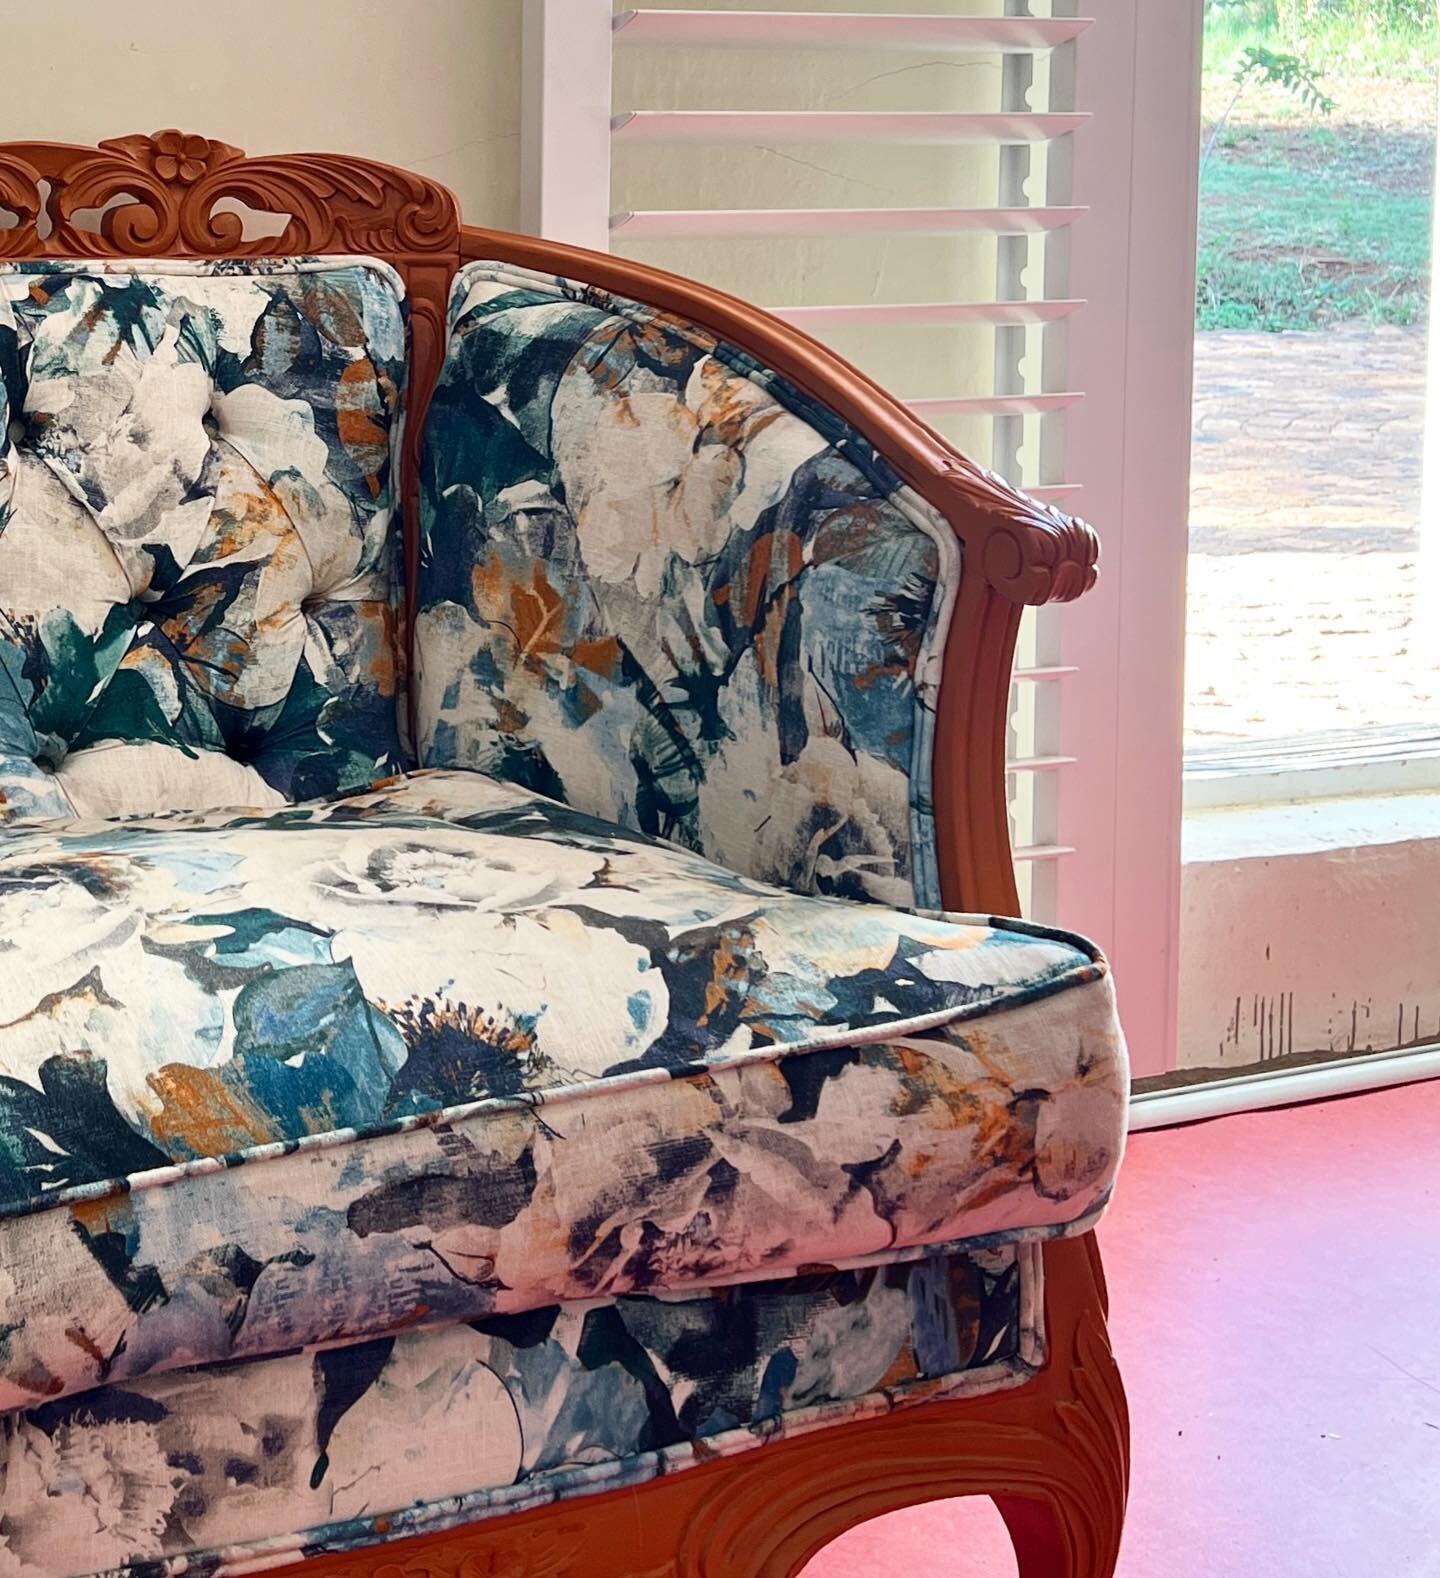 Furniture, beyond its functional purpose, can hold sentimental value, evoke nostalgia, and add character to a home.

Restoring old furniture allows to revive worn-out pieces and bring them back to life. Whether it's a family heirloom, a vintage find,